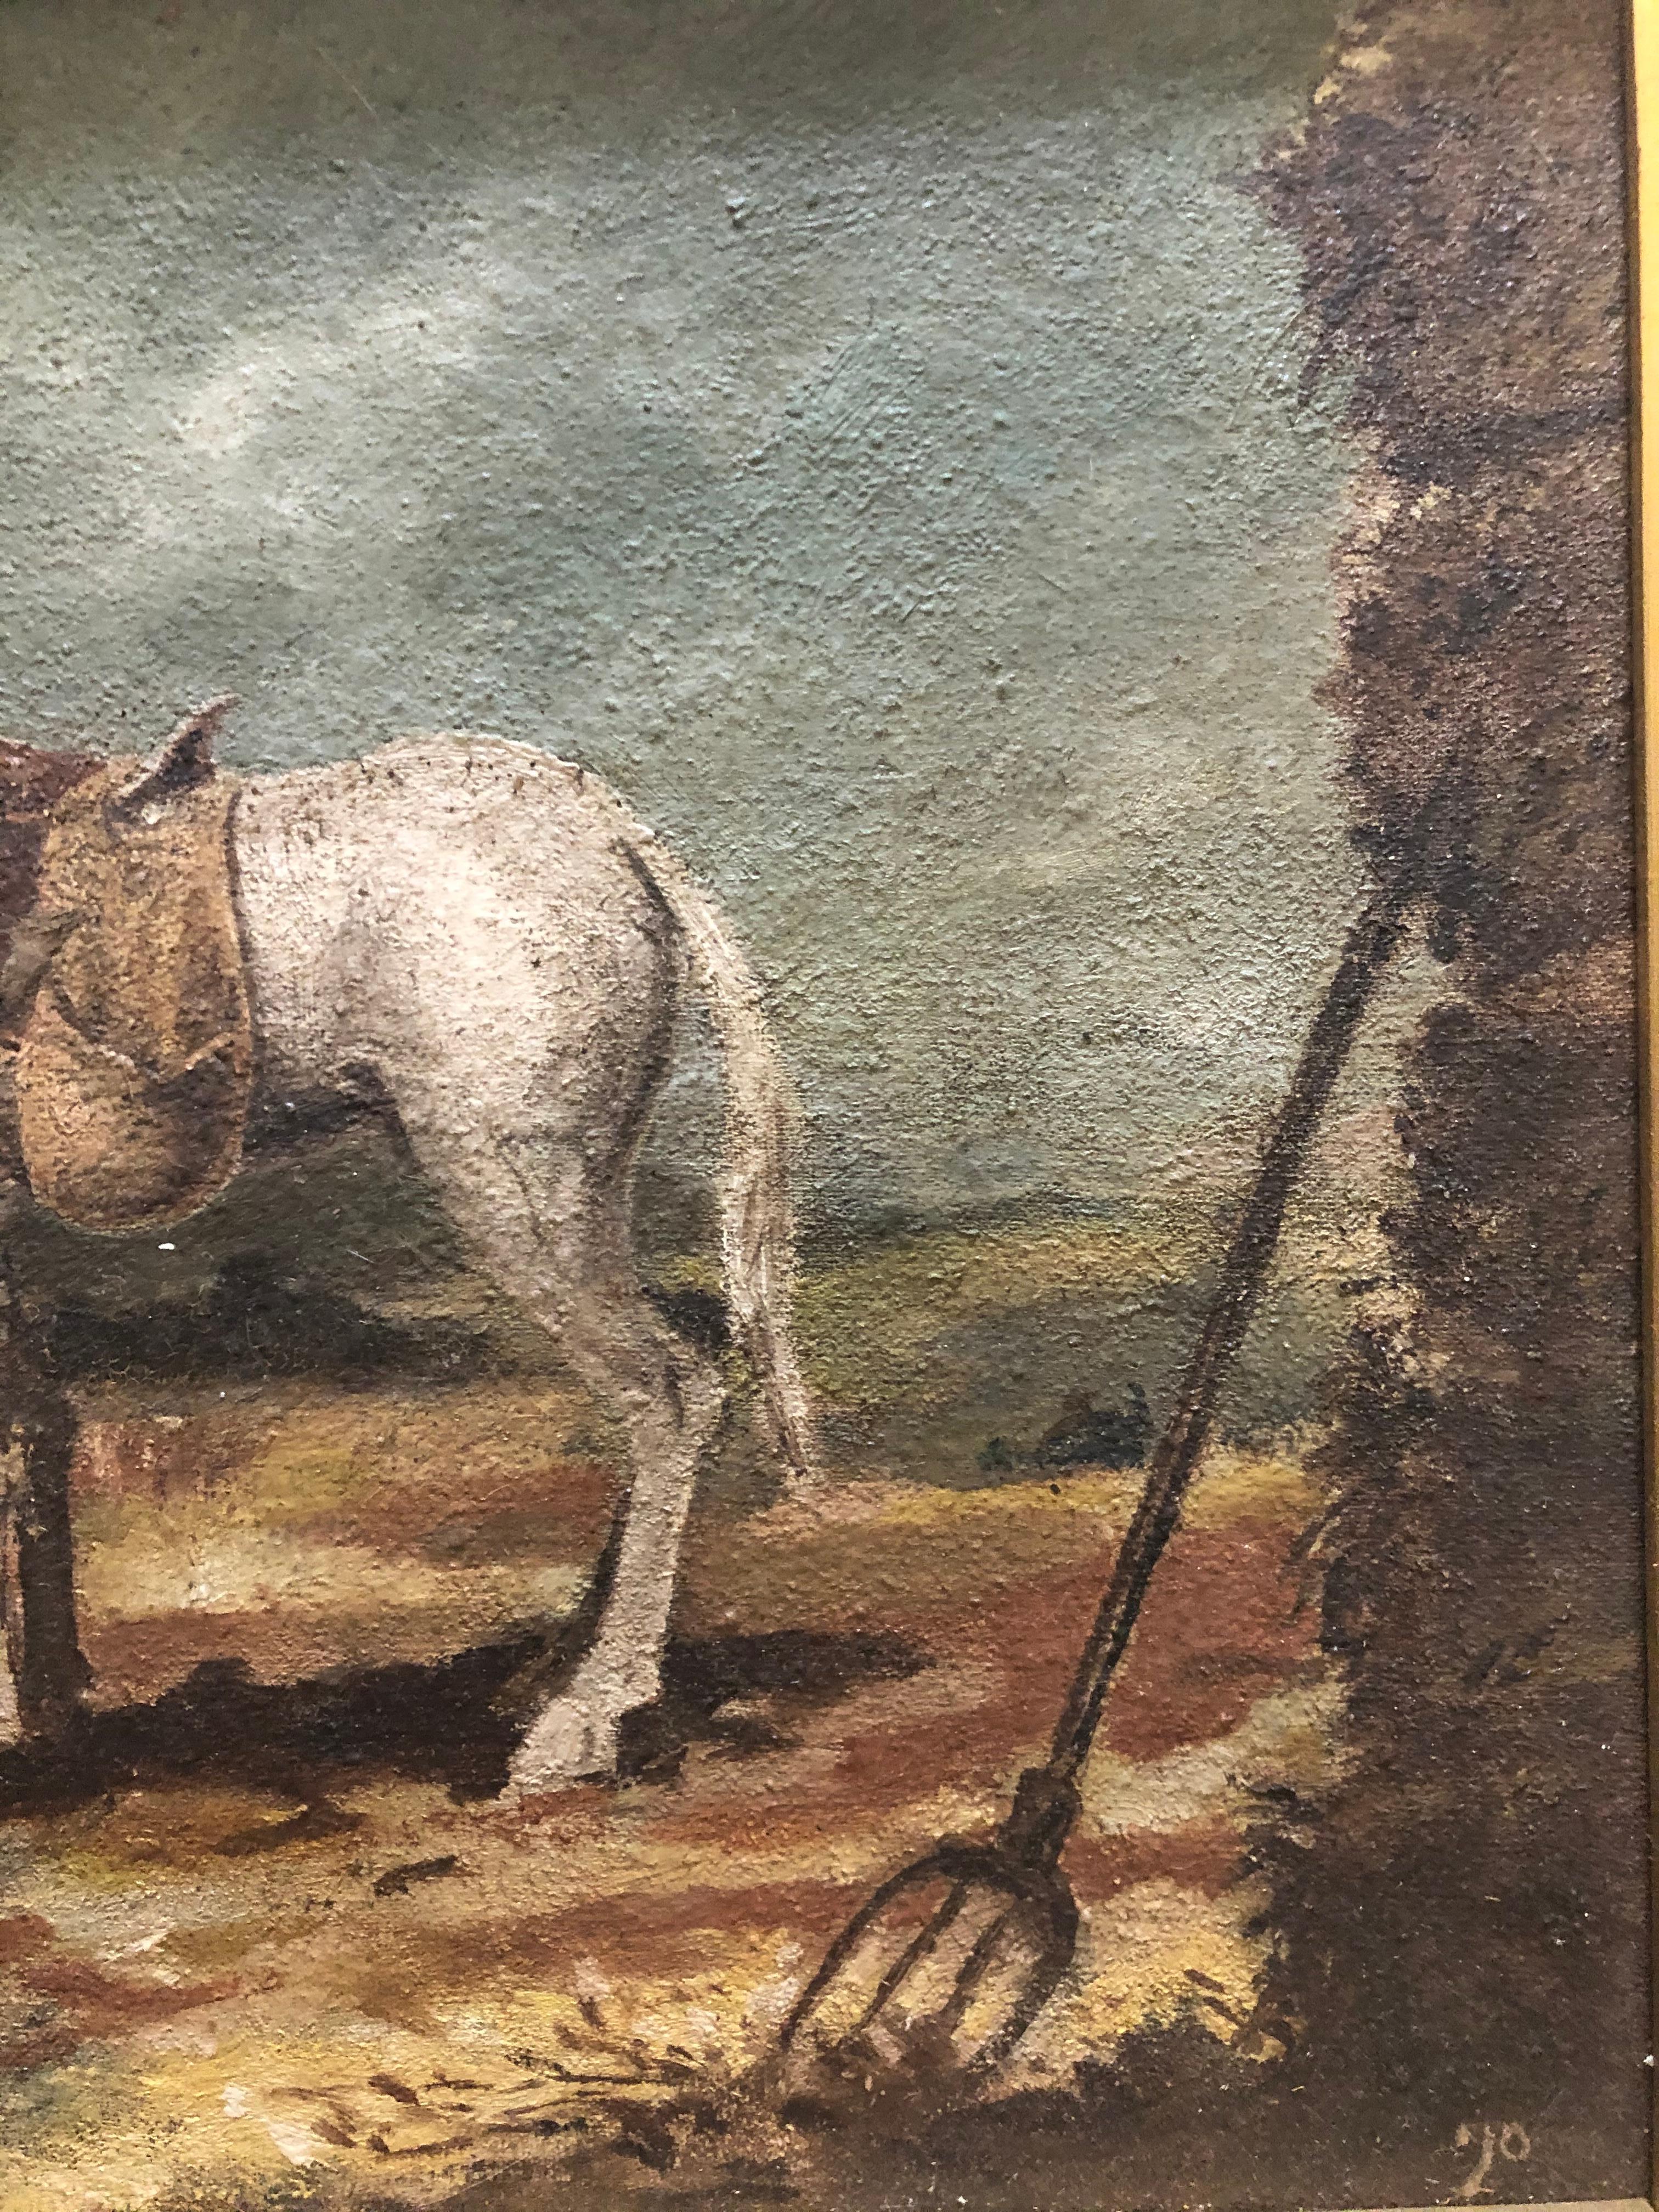 Early 20th century Horse with Feedbag - American Realist Painting by Unknown